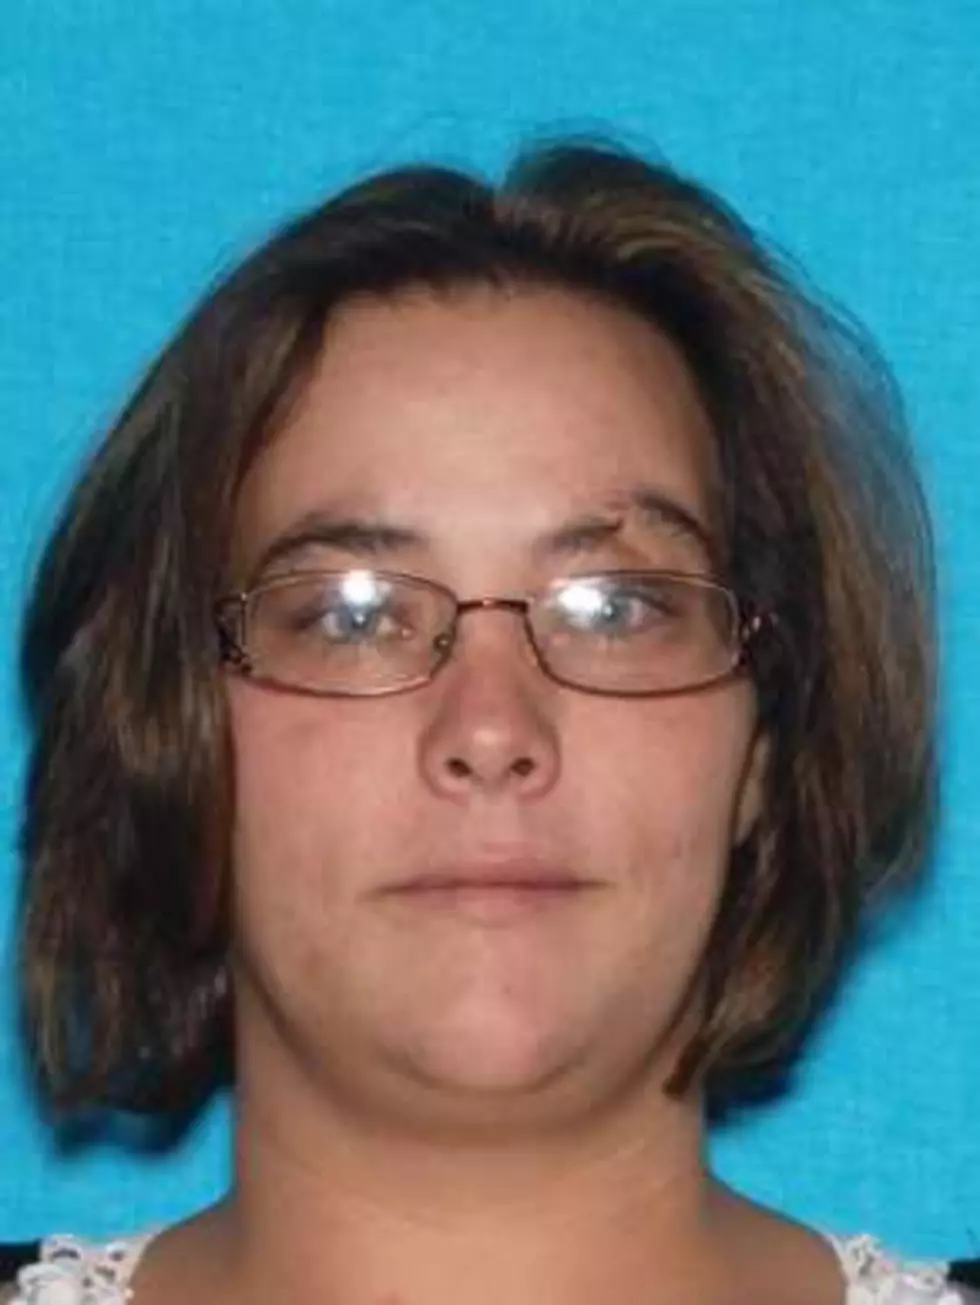 Hannibal Woman Pleads Guilty to Hindering Prosecution